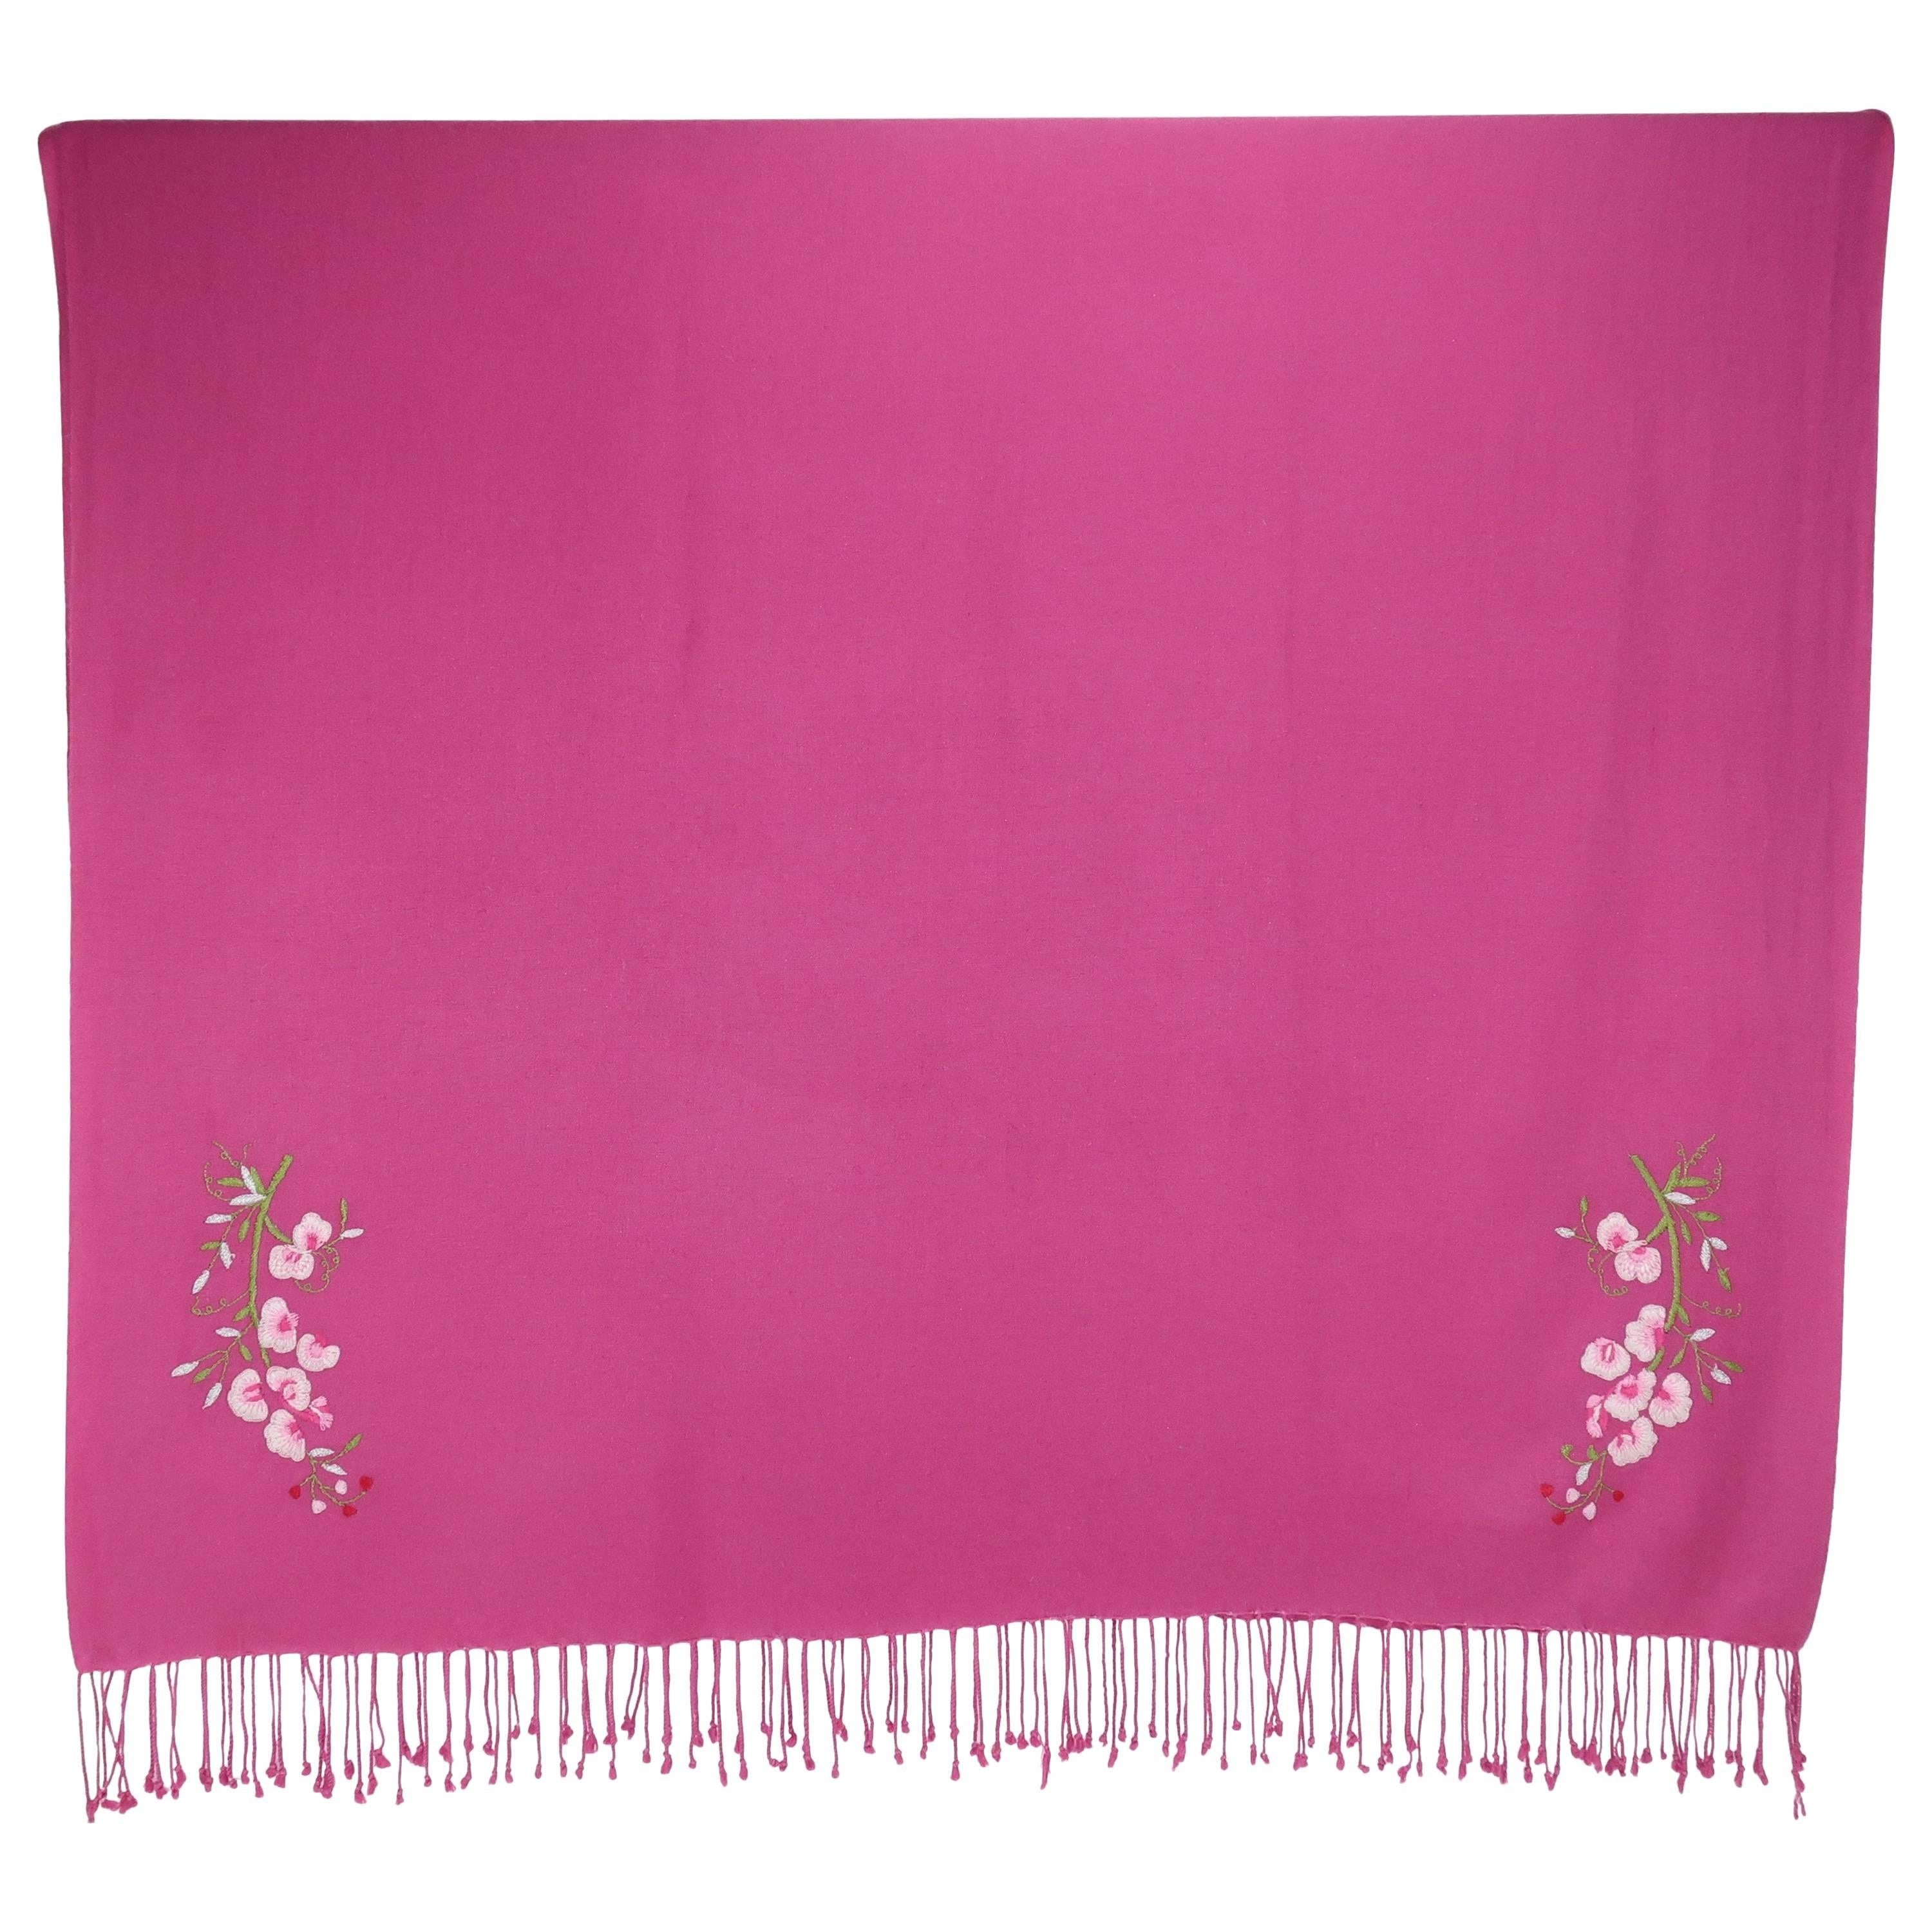 Large Hot Pink Wool Scarf Shawl With Cherry Blossoms